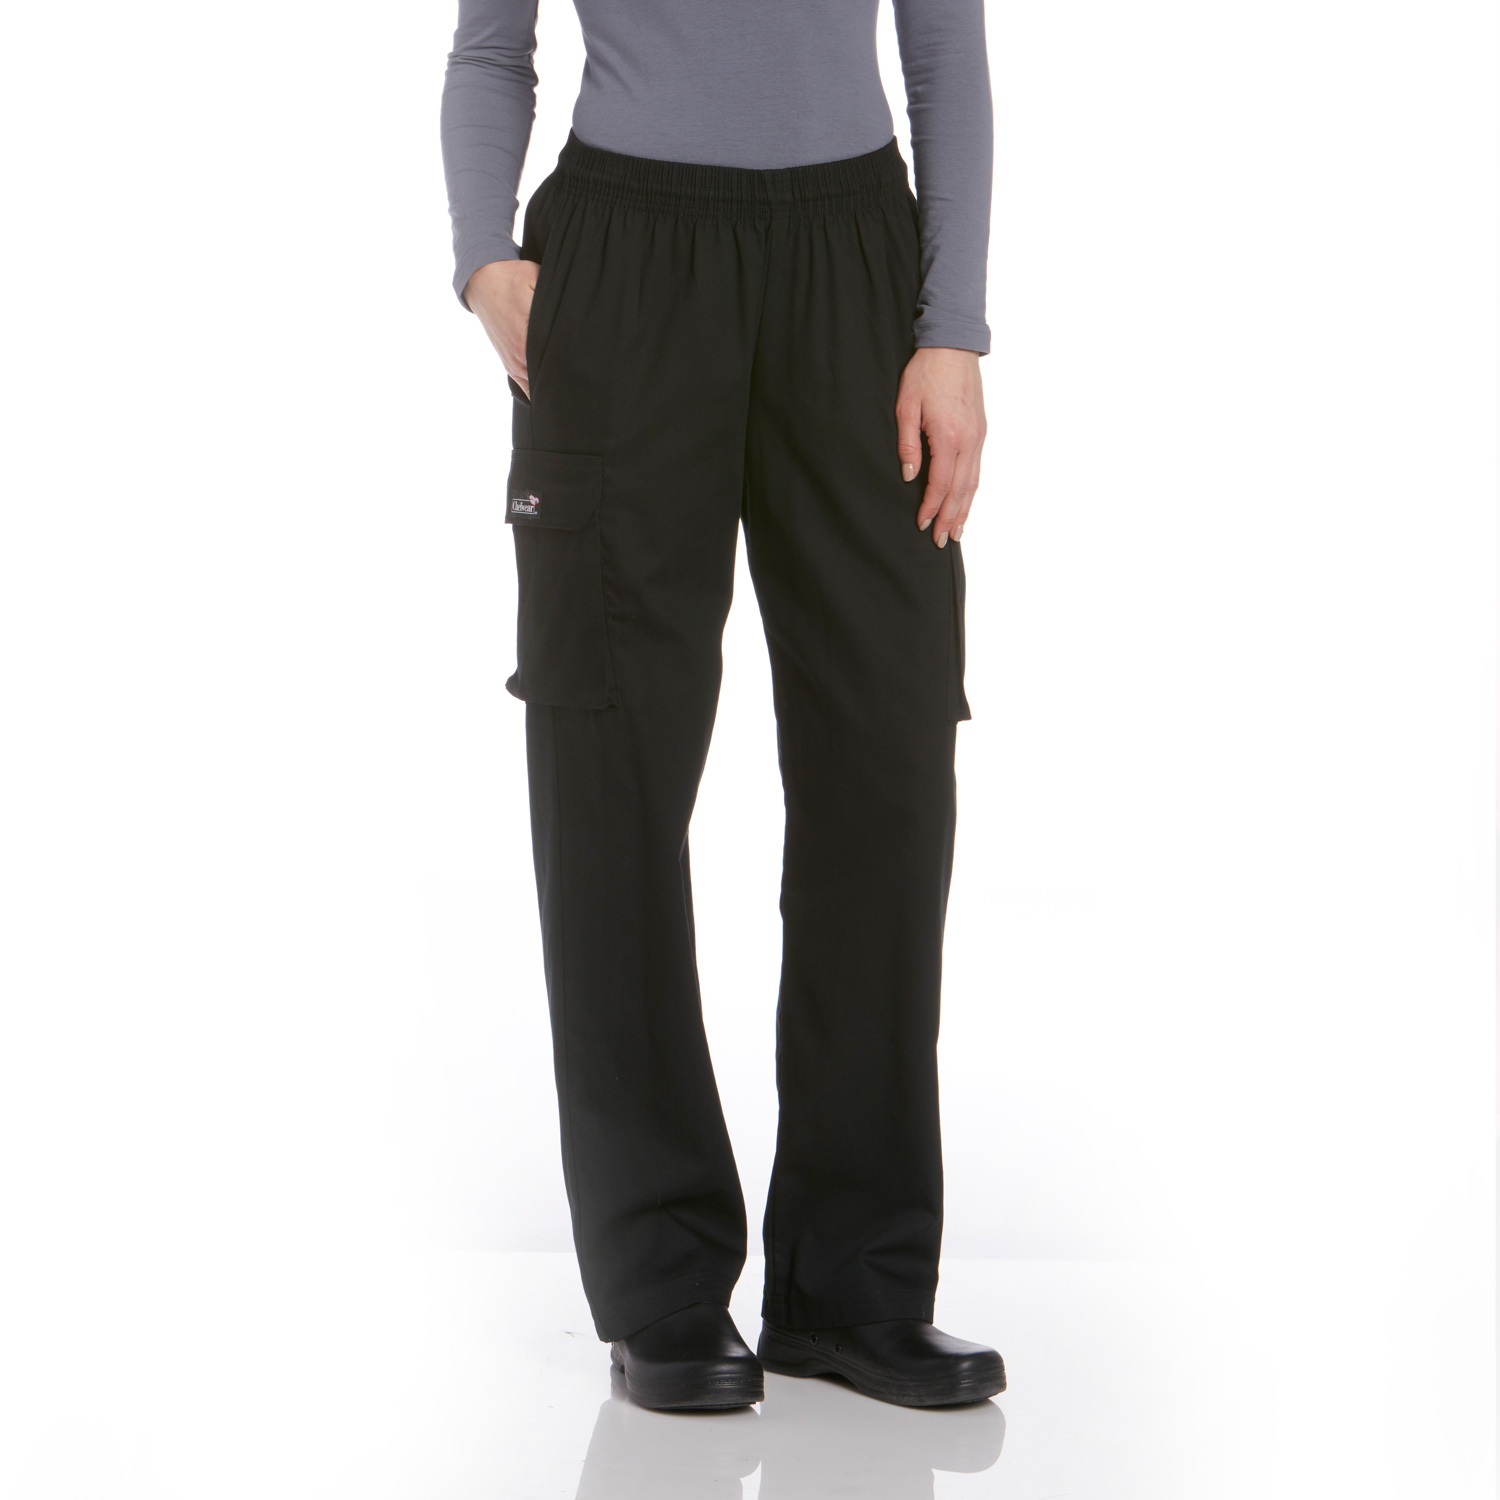 women's cargo pants with lots of pockets